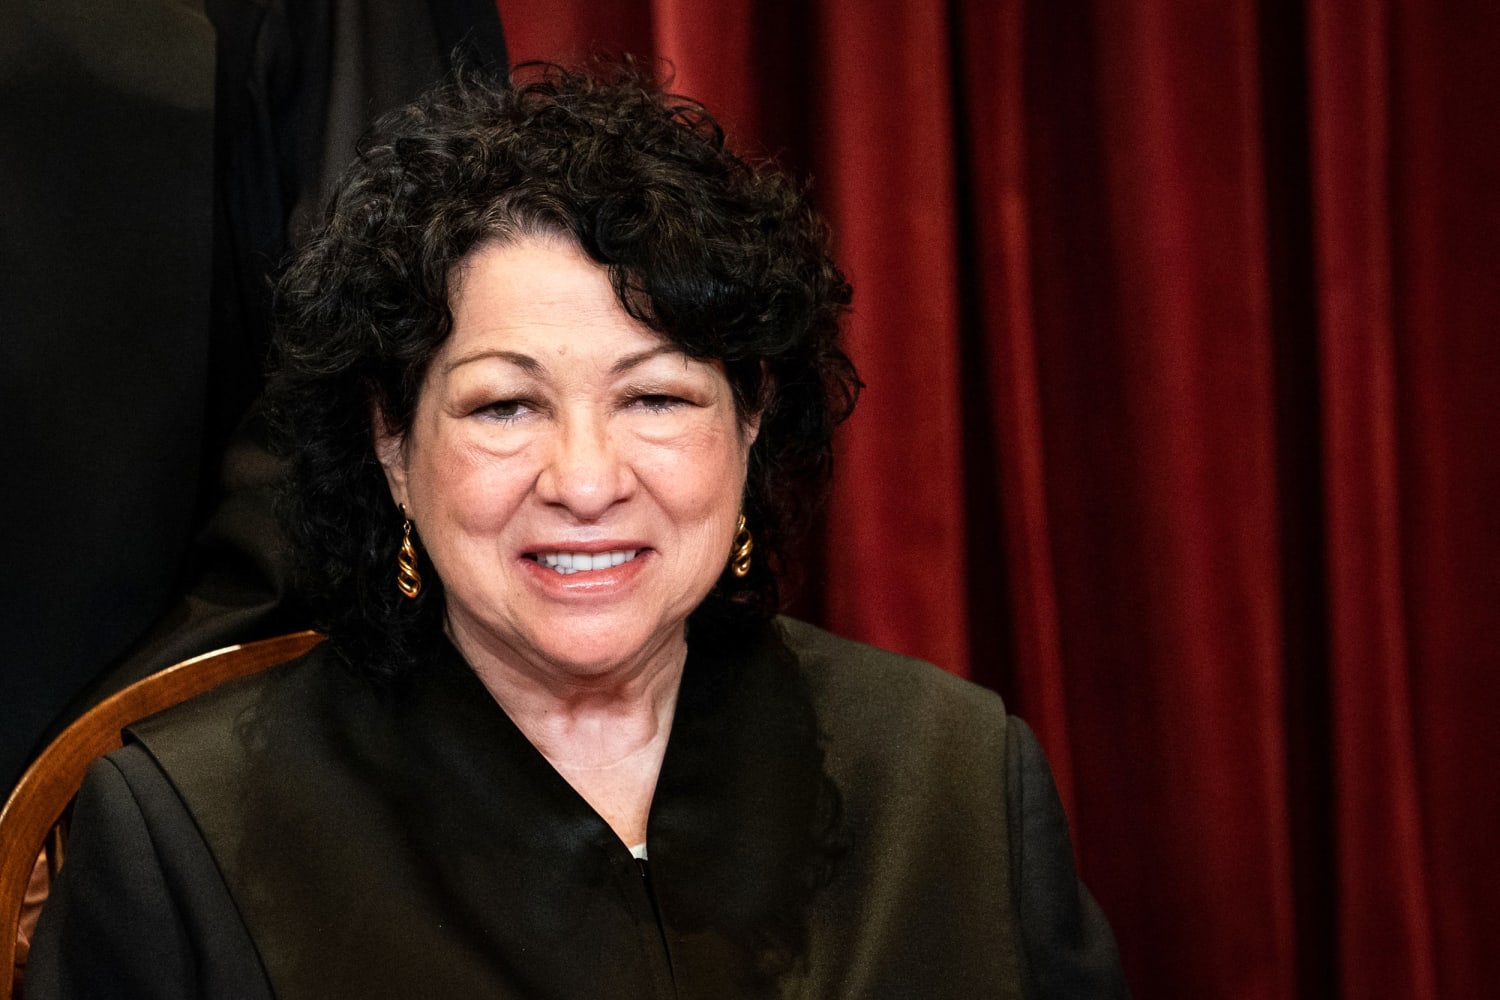 Sotomayor suggests Supreme Court won’t ‘survive the stench’ of overturning Roe v. Wade